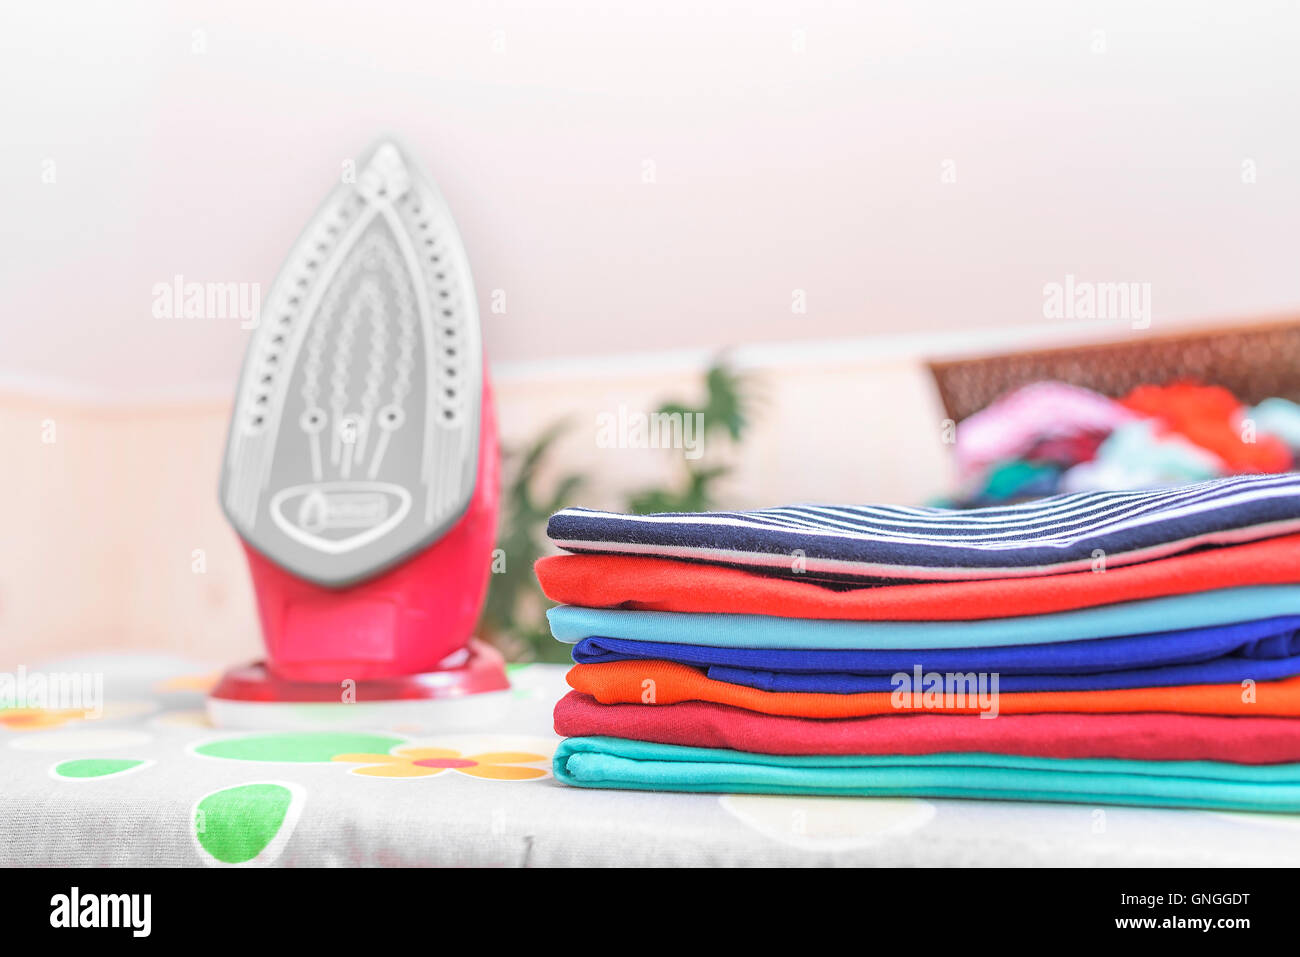 Iron and ironed clothes on an ironing board. Stock Photo